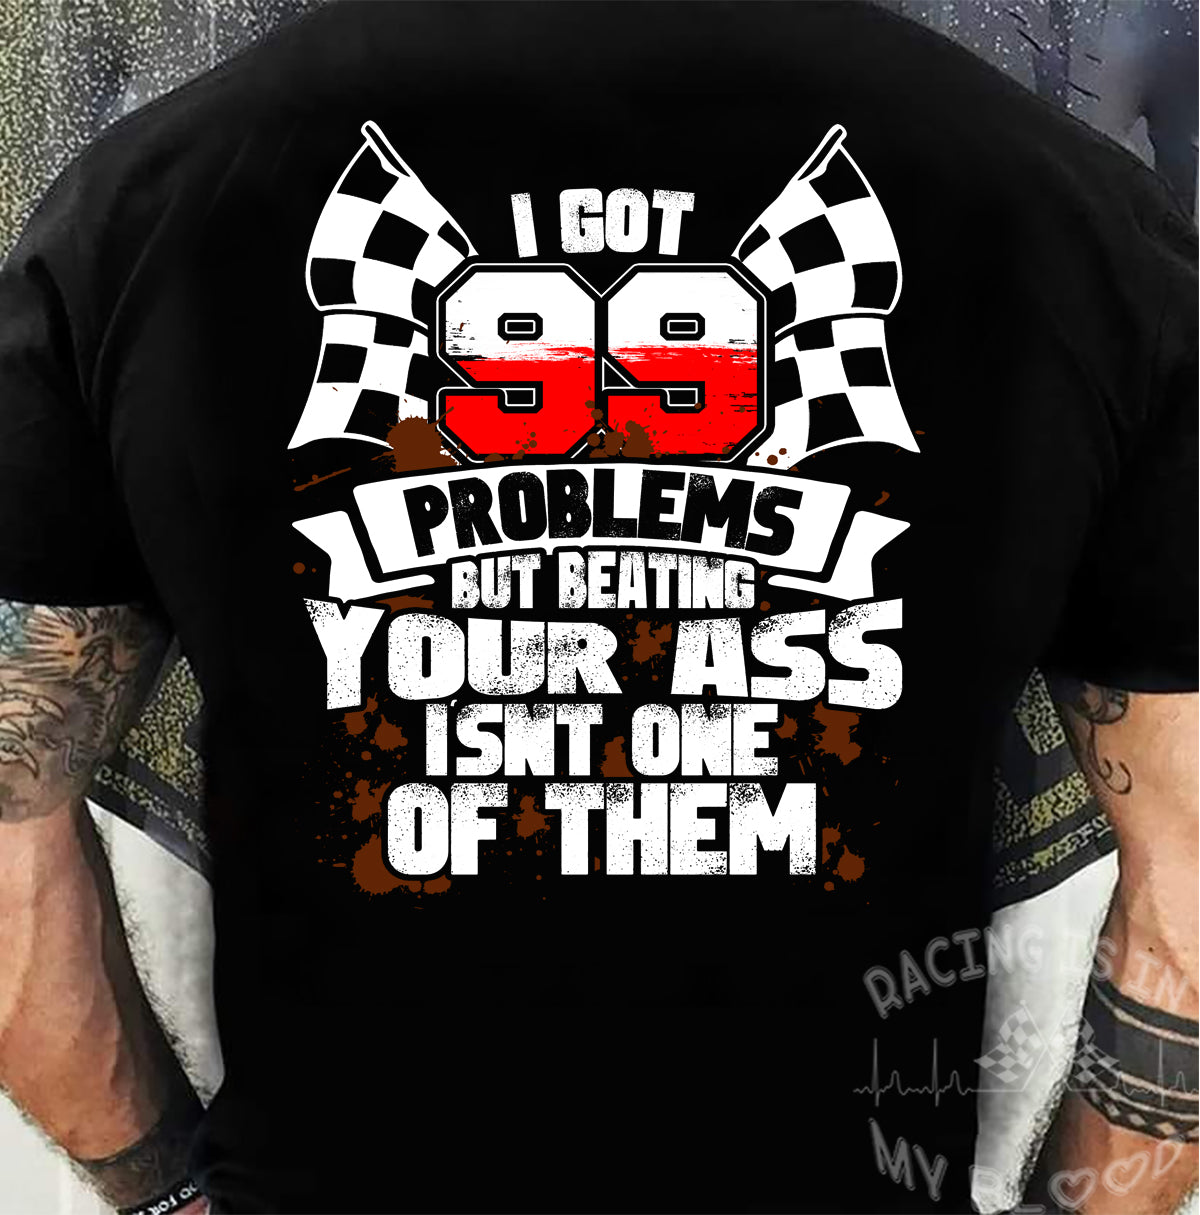 I Got 99 Problems But Beating Your Ass Isn't One Of Them T-Shirts!